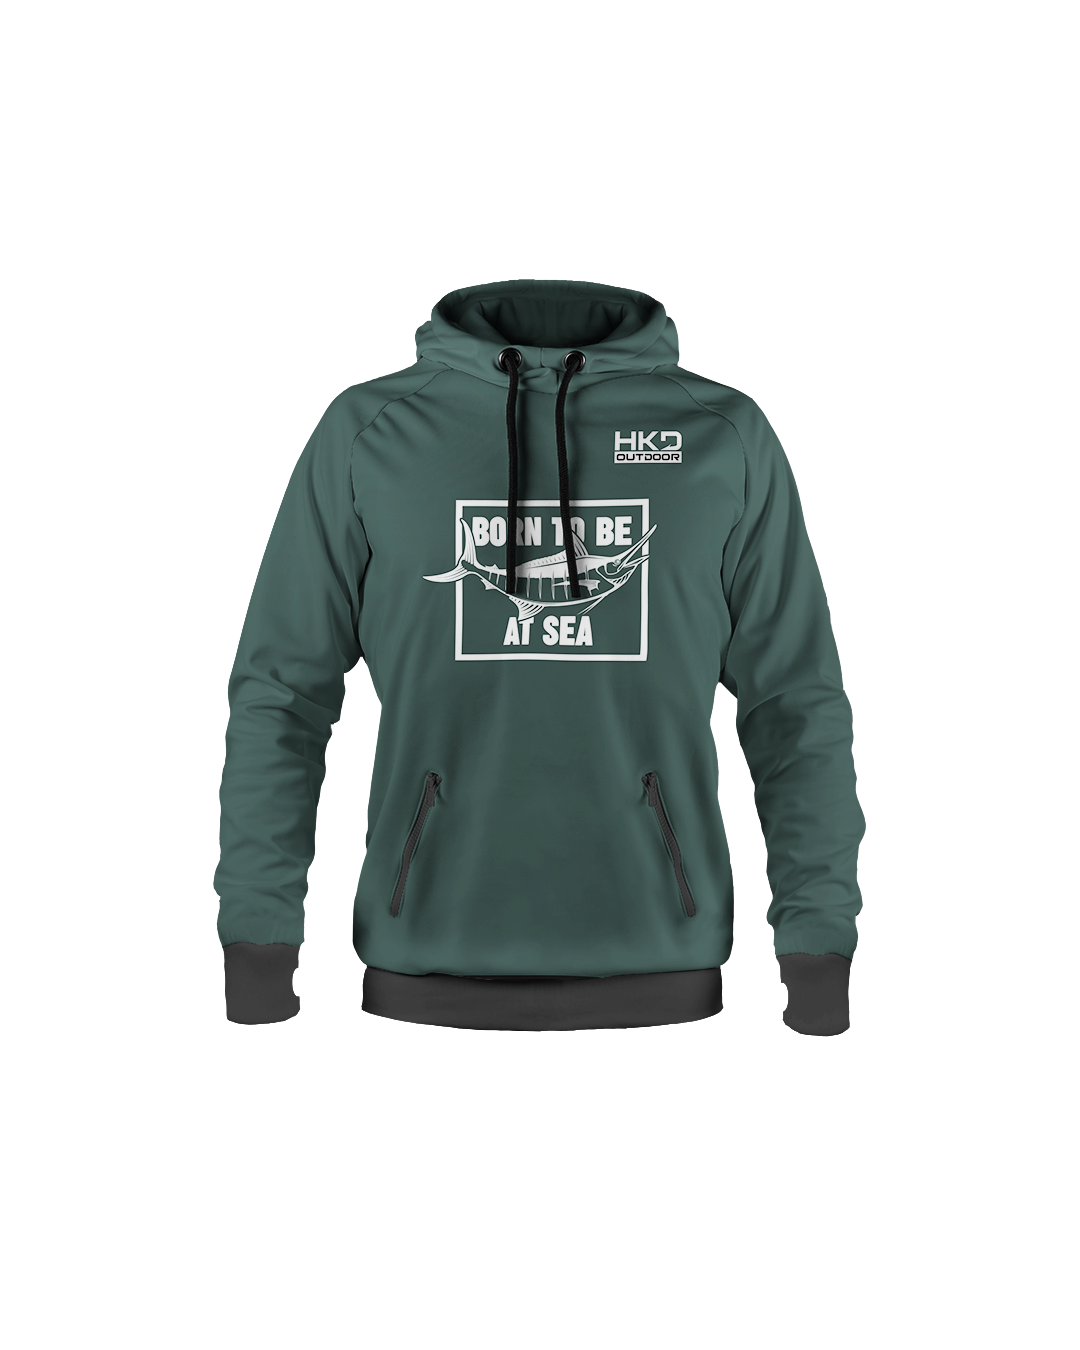 Born To Be At Sea hoodie